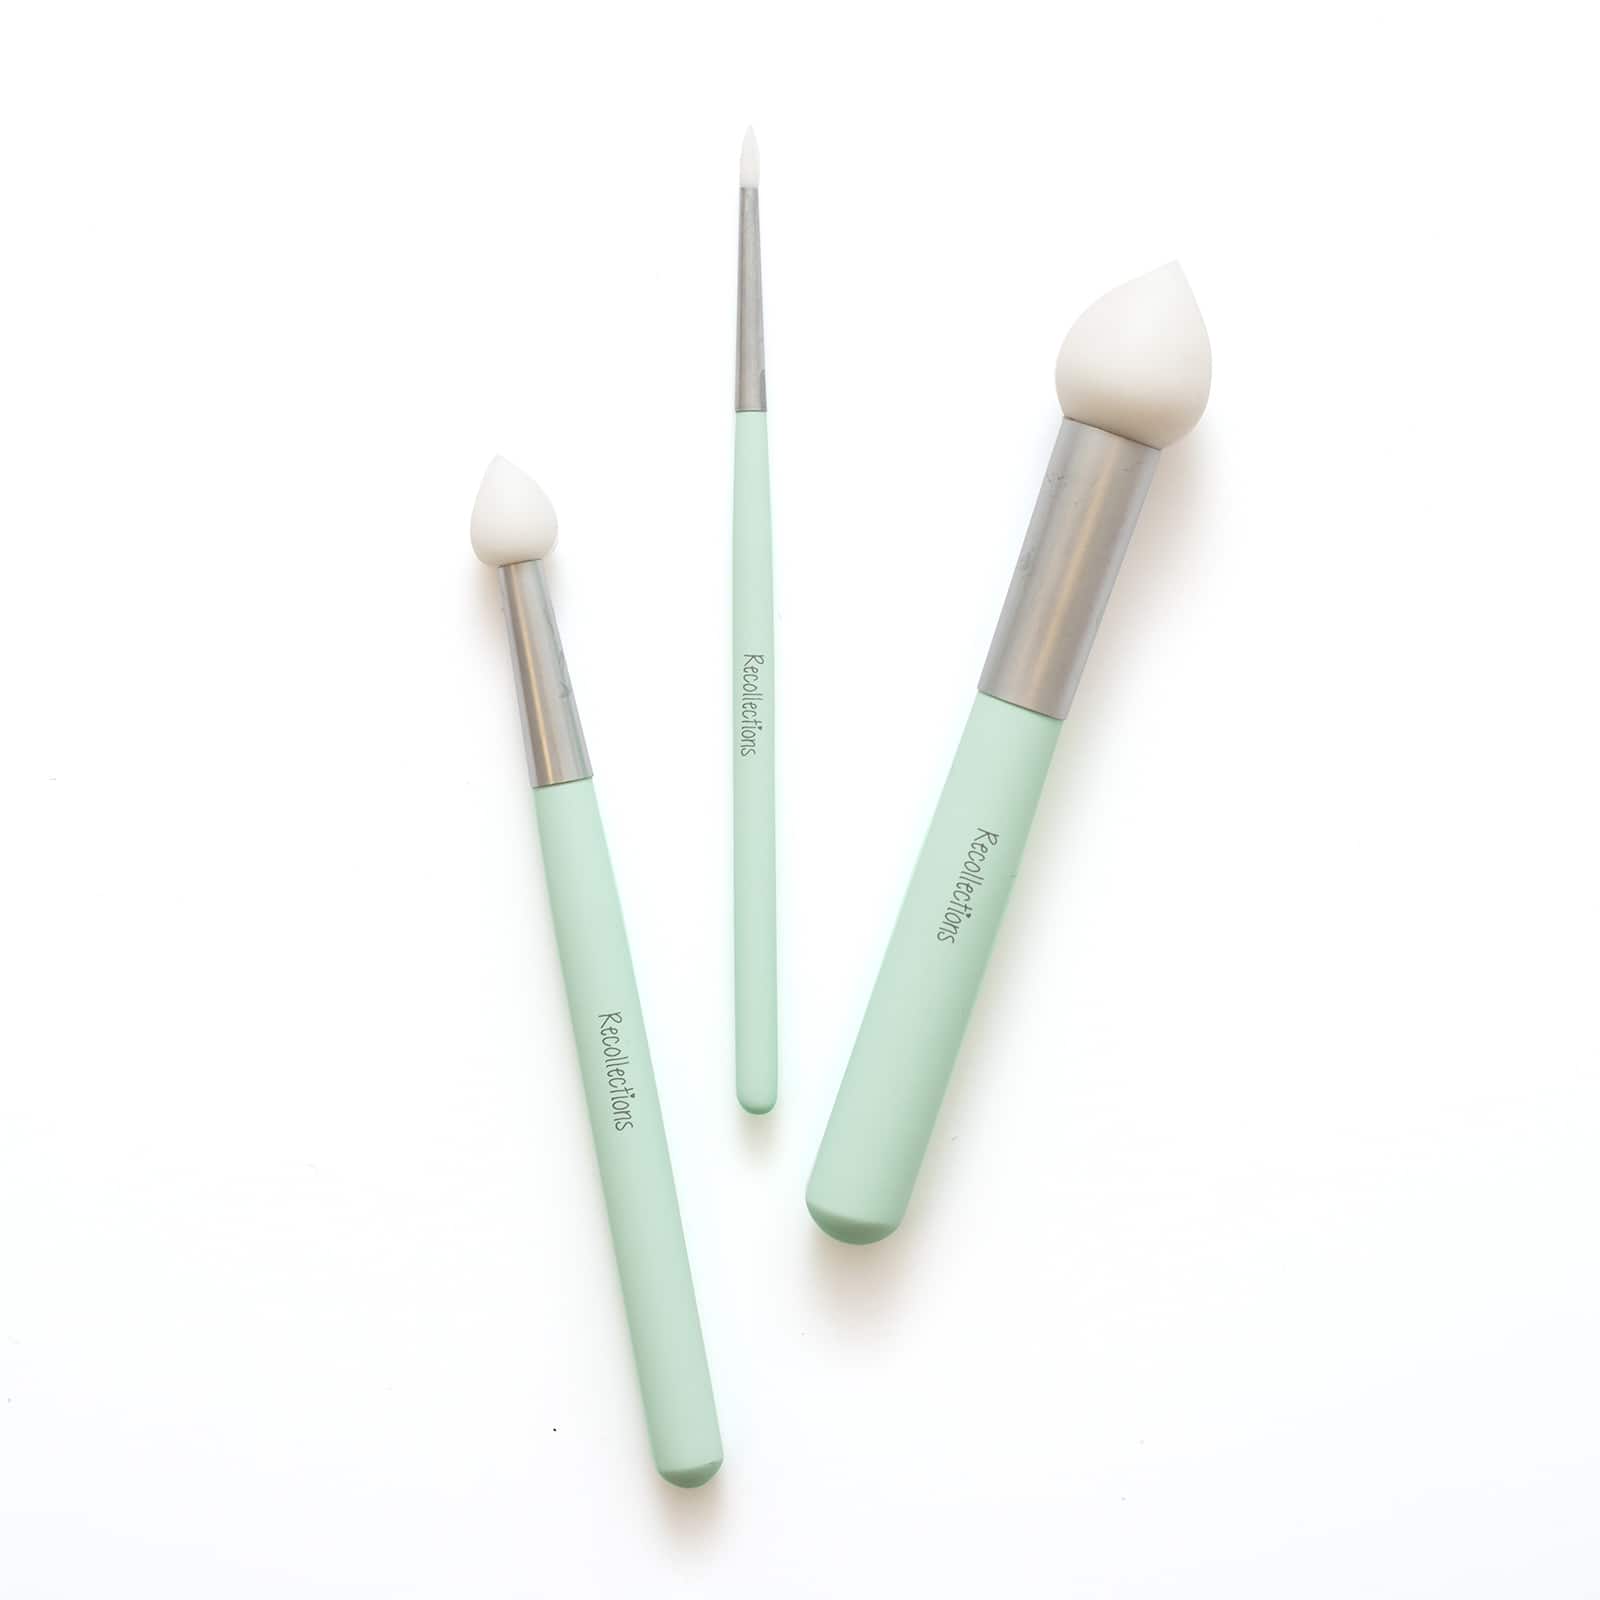 Buy SILICONE BRUSHES MEDIUM TIP SMALL (5 SILICONE PENCILS) online for 5,95€